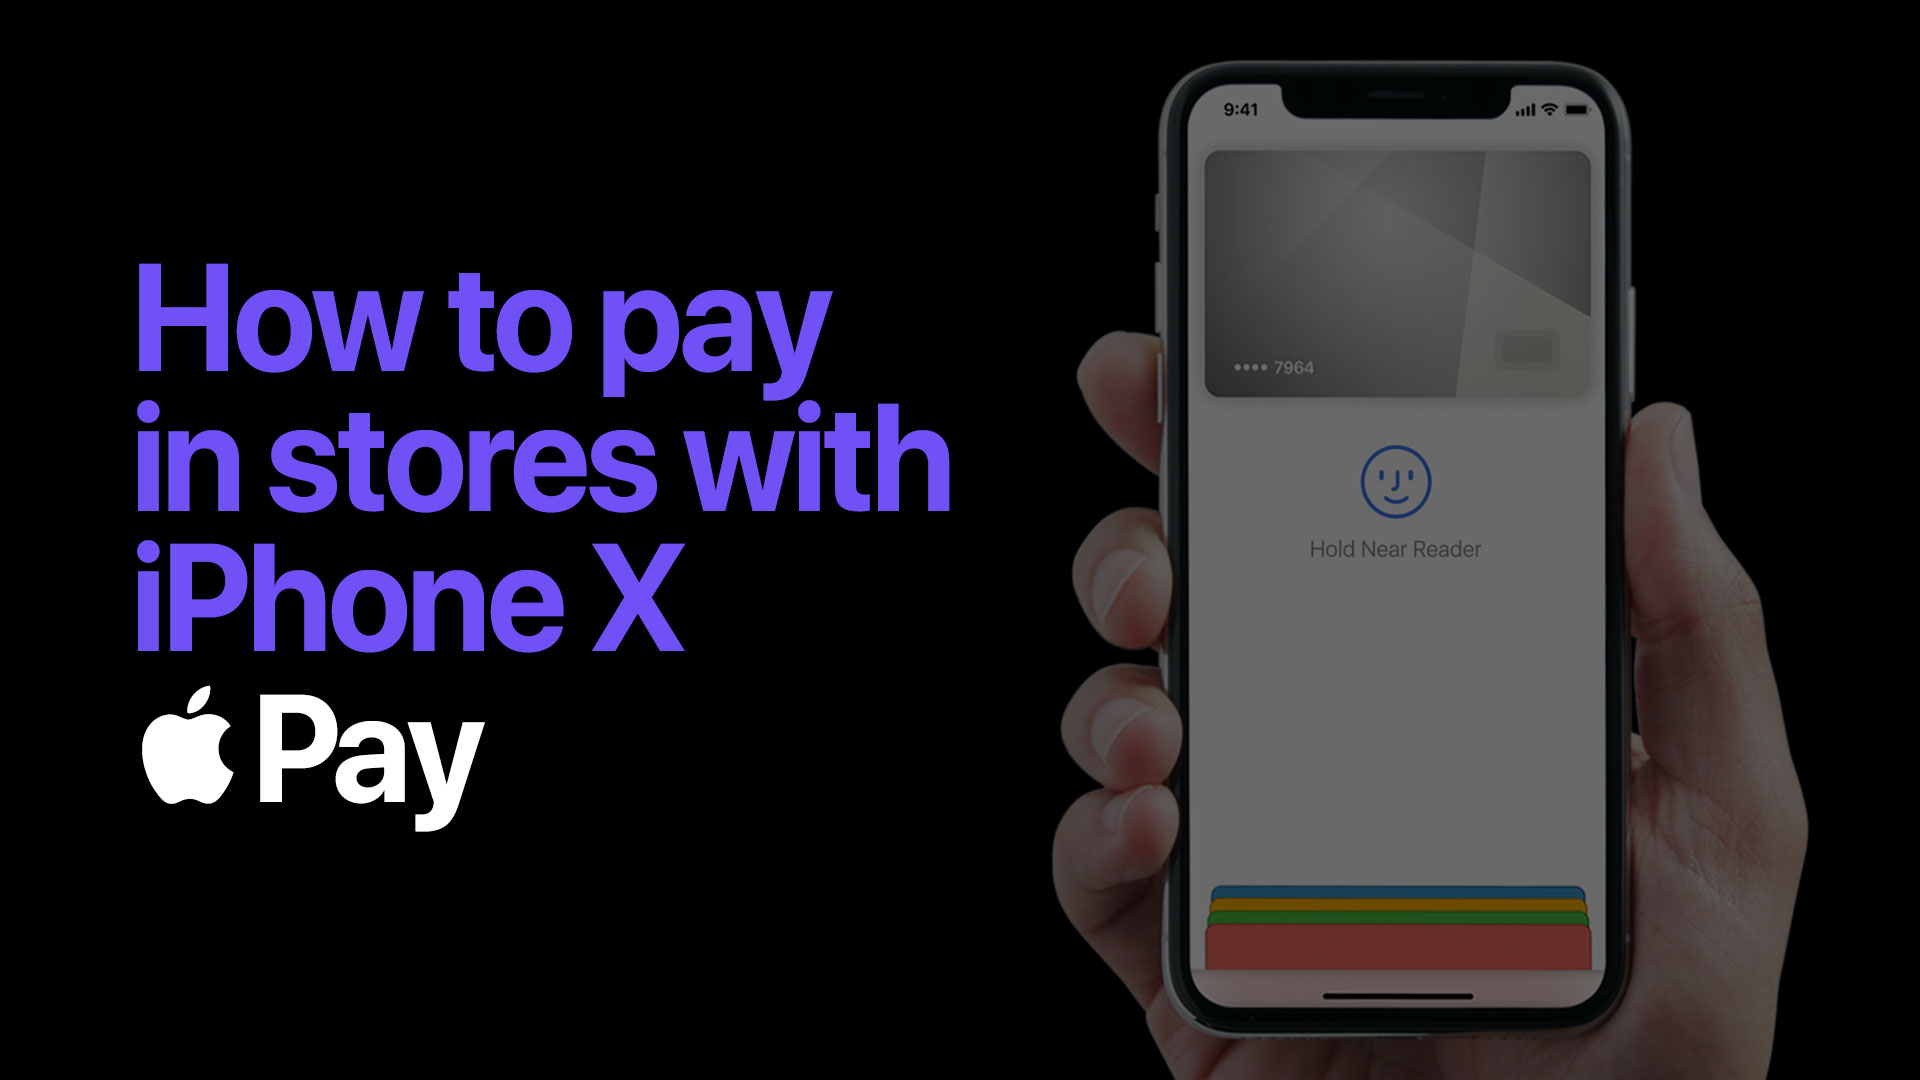 Pay with Touch ID on iPhone